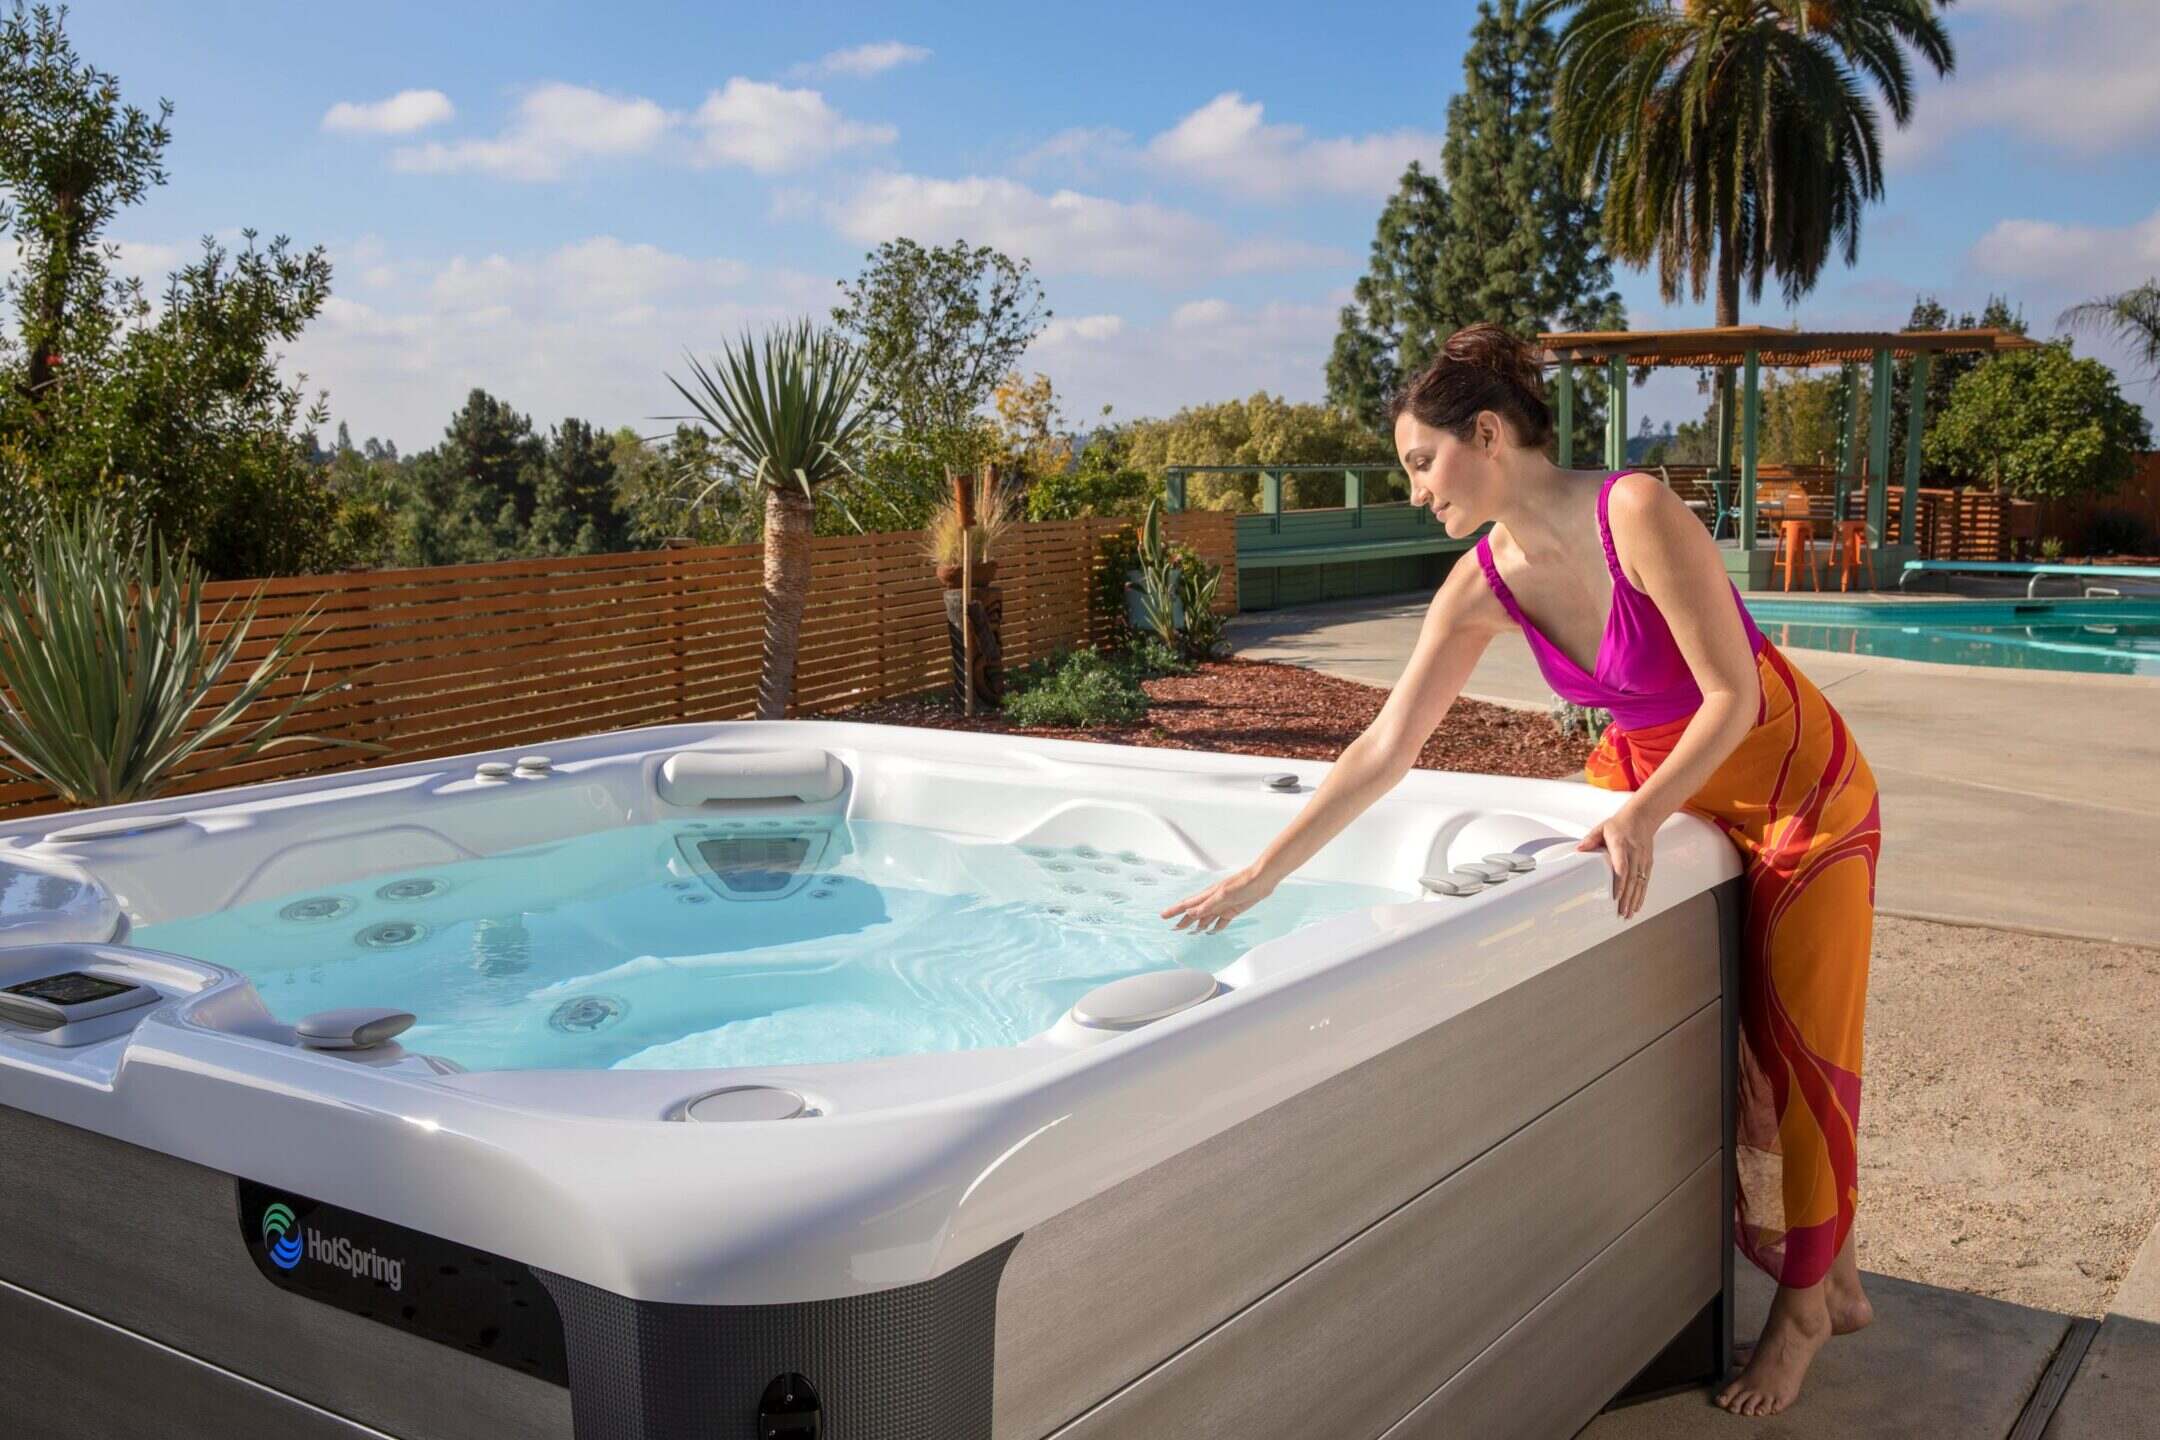 How To Soften Hot Tub Water